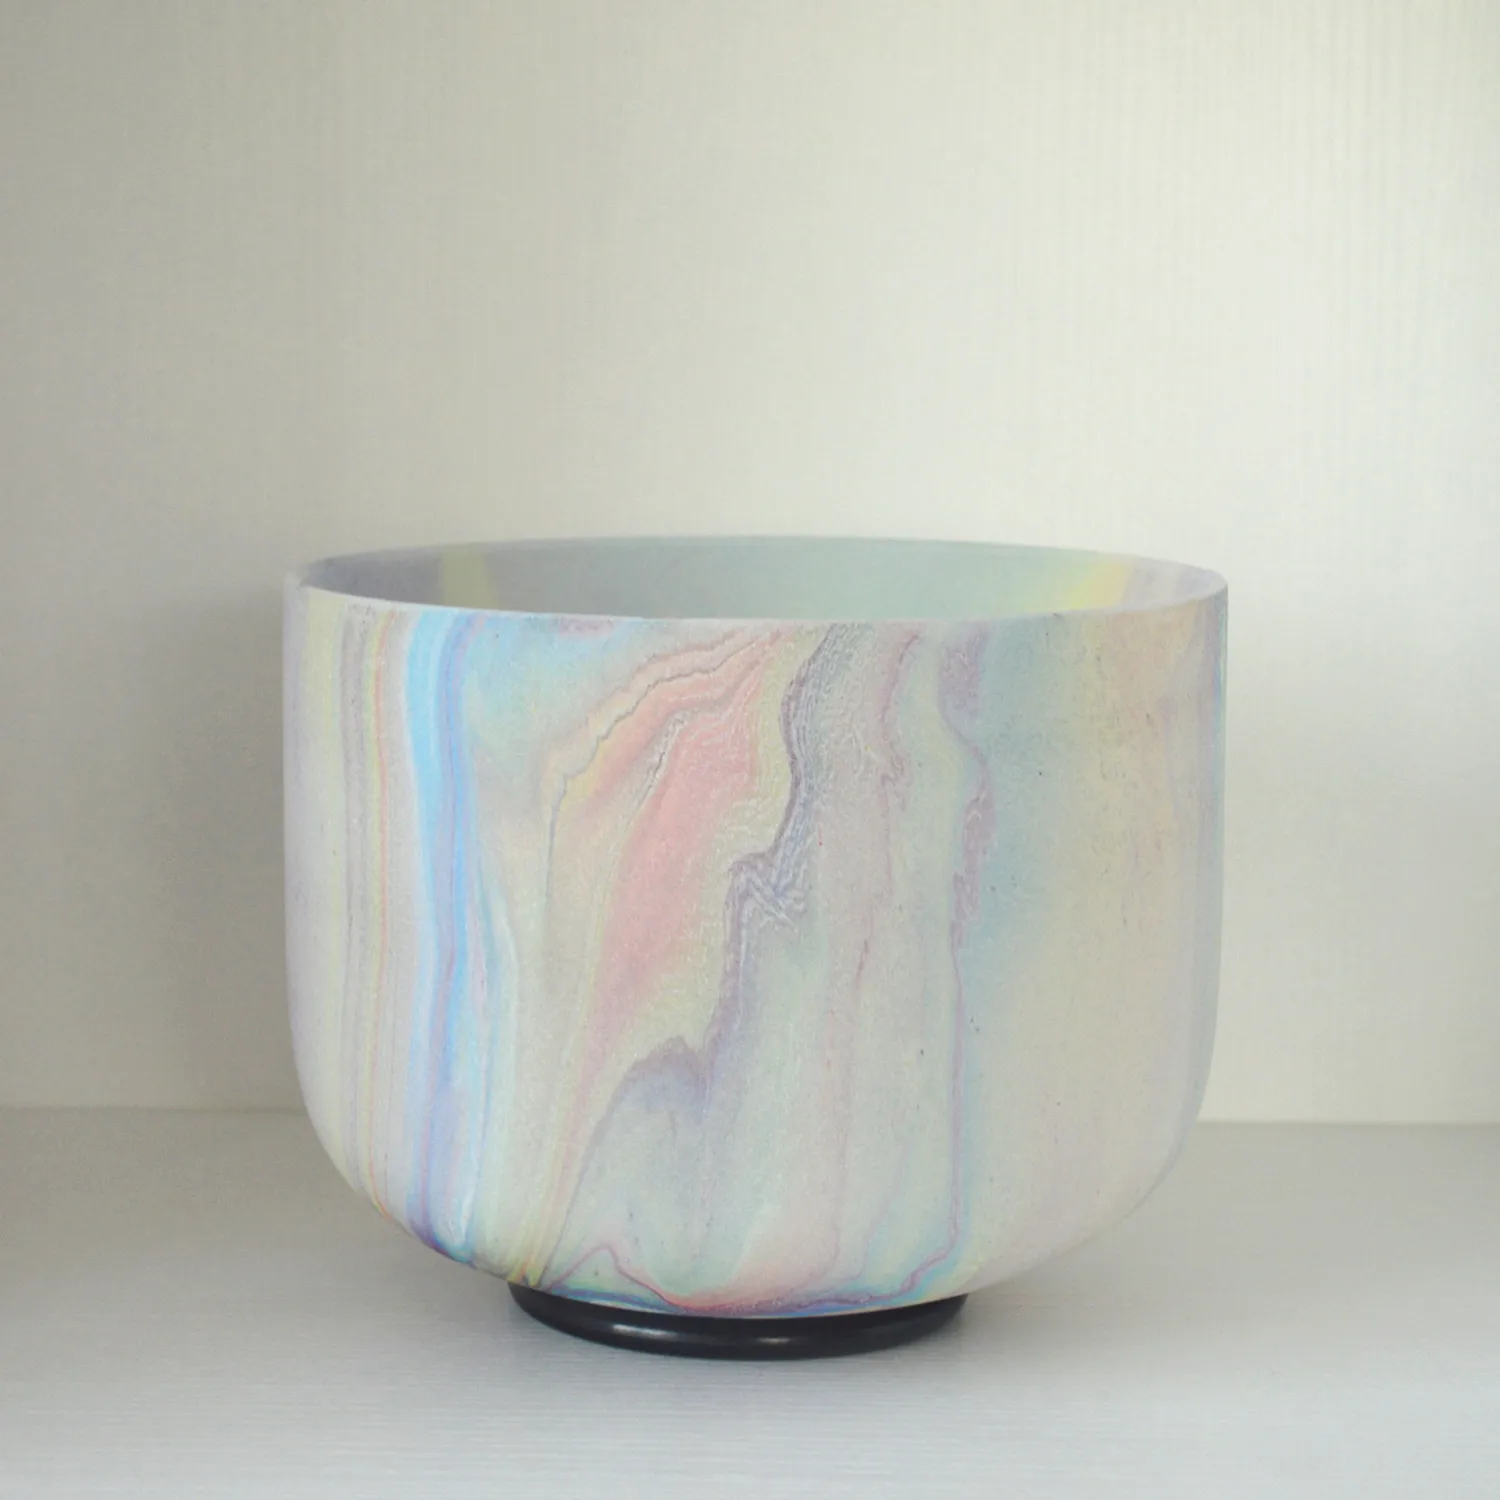 HF High Performance Hand-Painted Colored Quartz Crystal Singing Bowls for Sound Healing